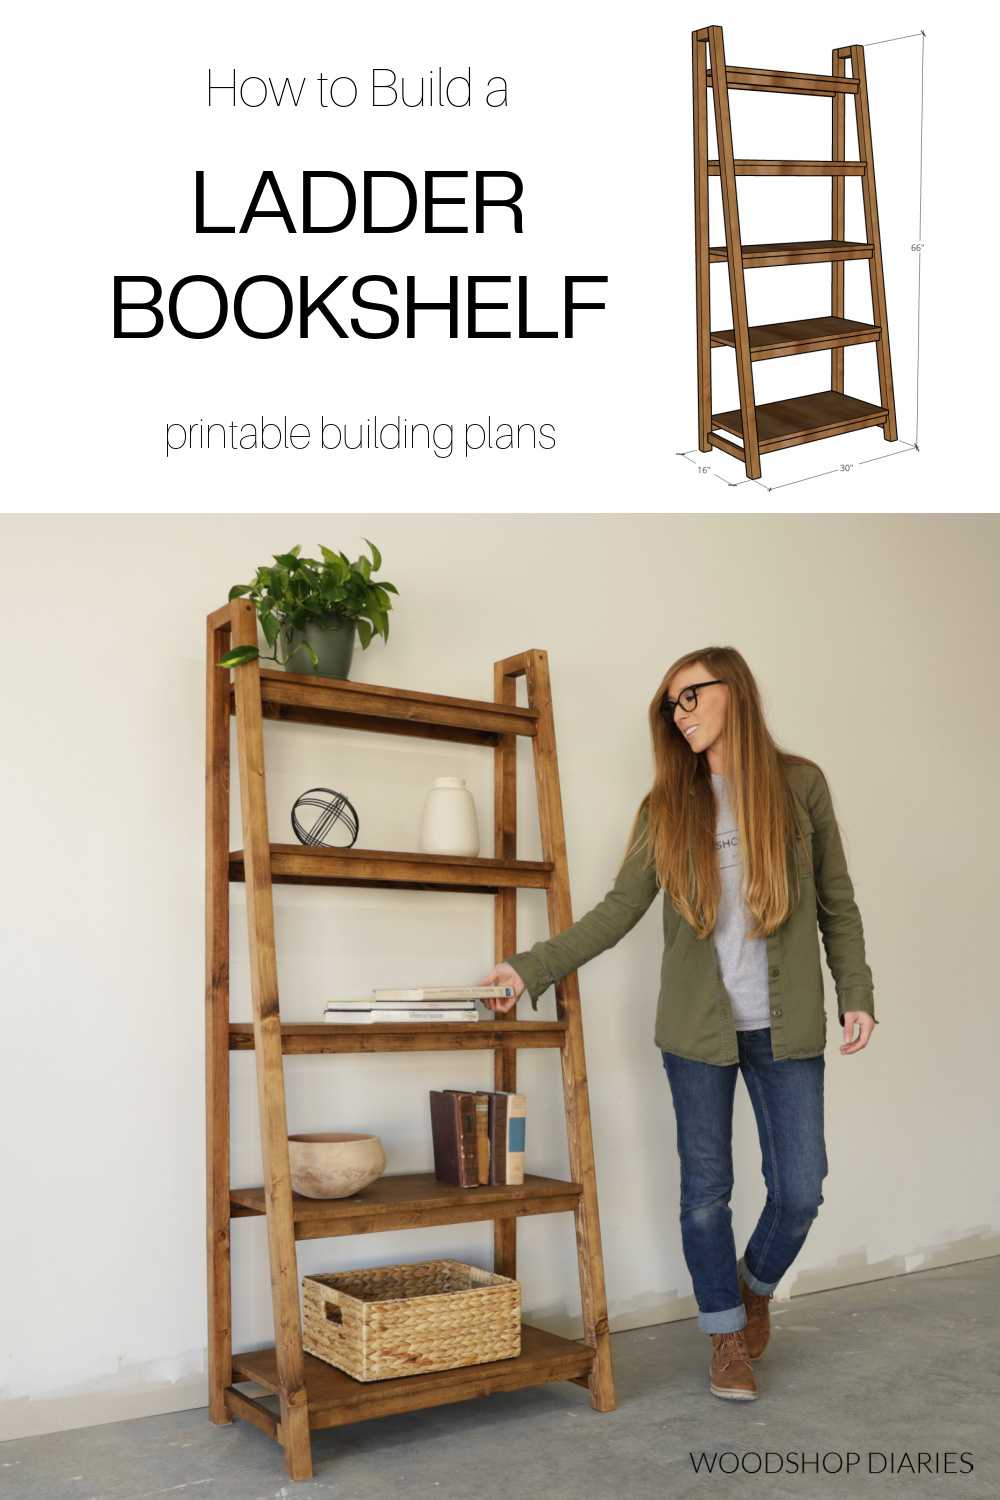 Pinterest collage image showing Shara Woodshop Diaries standing next to completed DIY ladder bookshelf on bottom and dimensional diagram at top with text "How to build a ladder bookshelf"